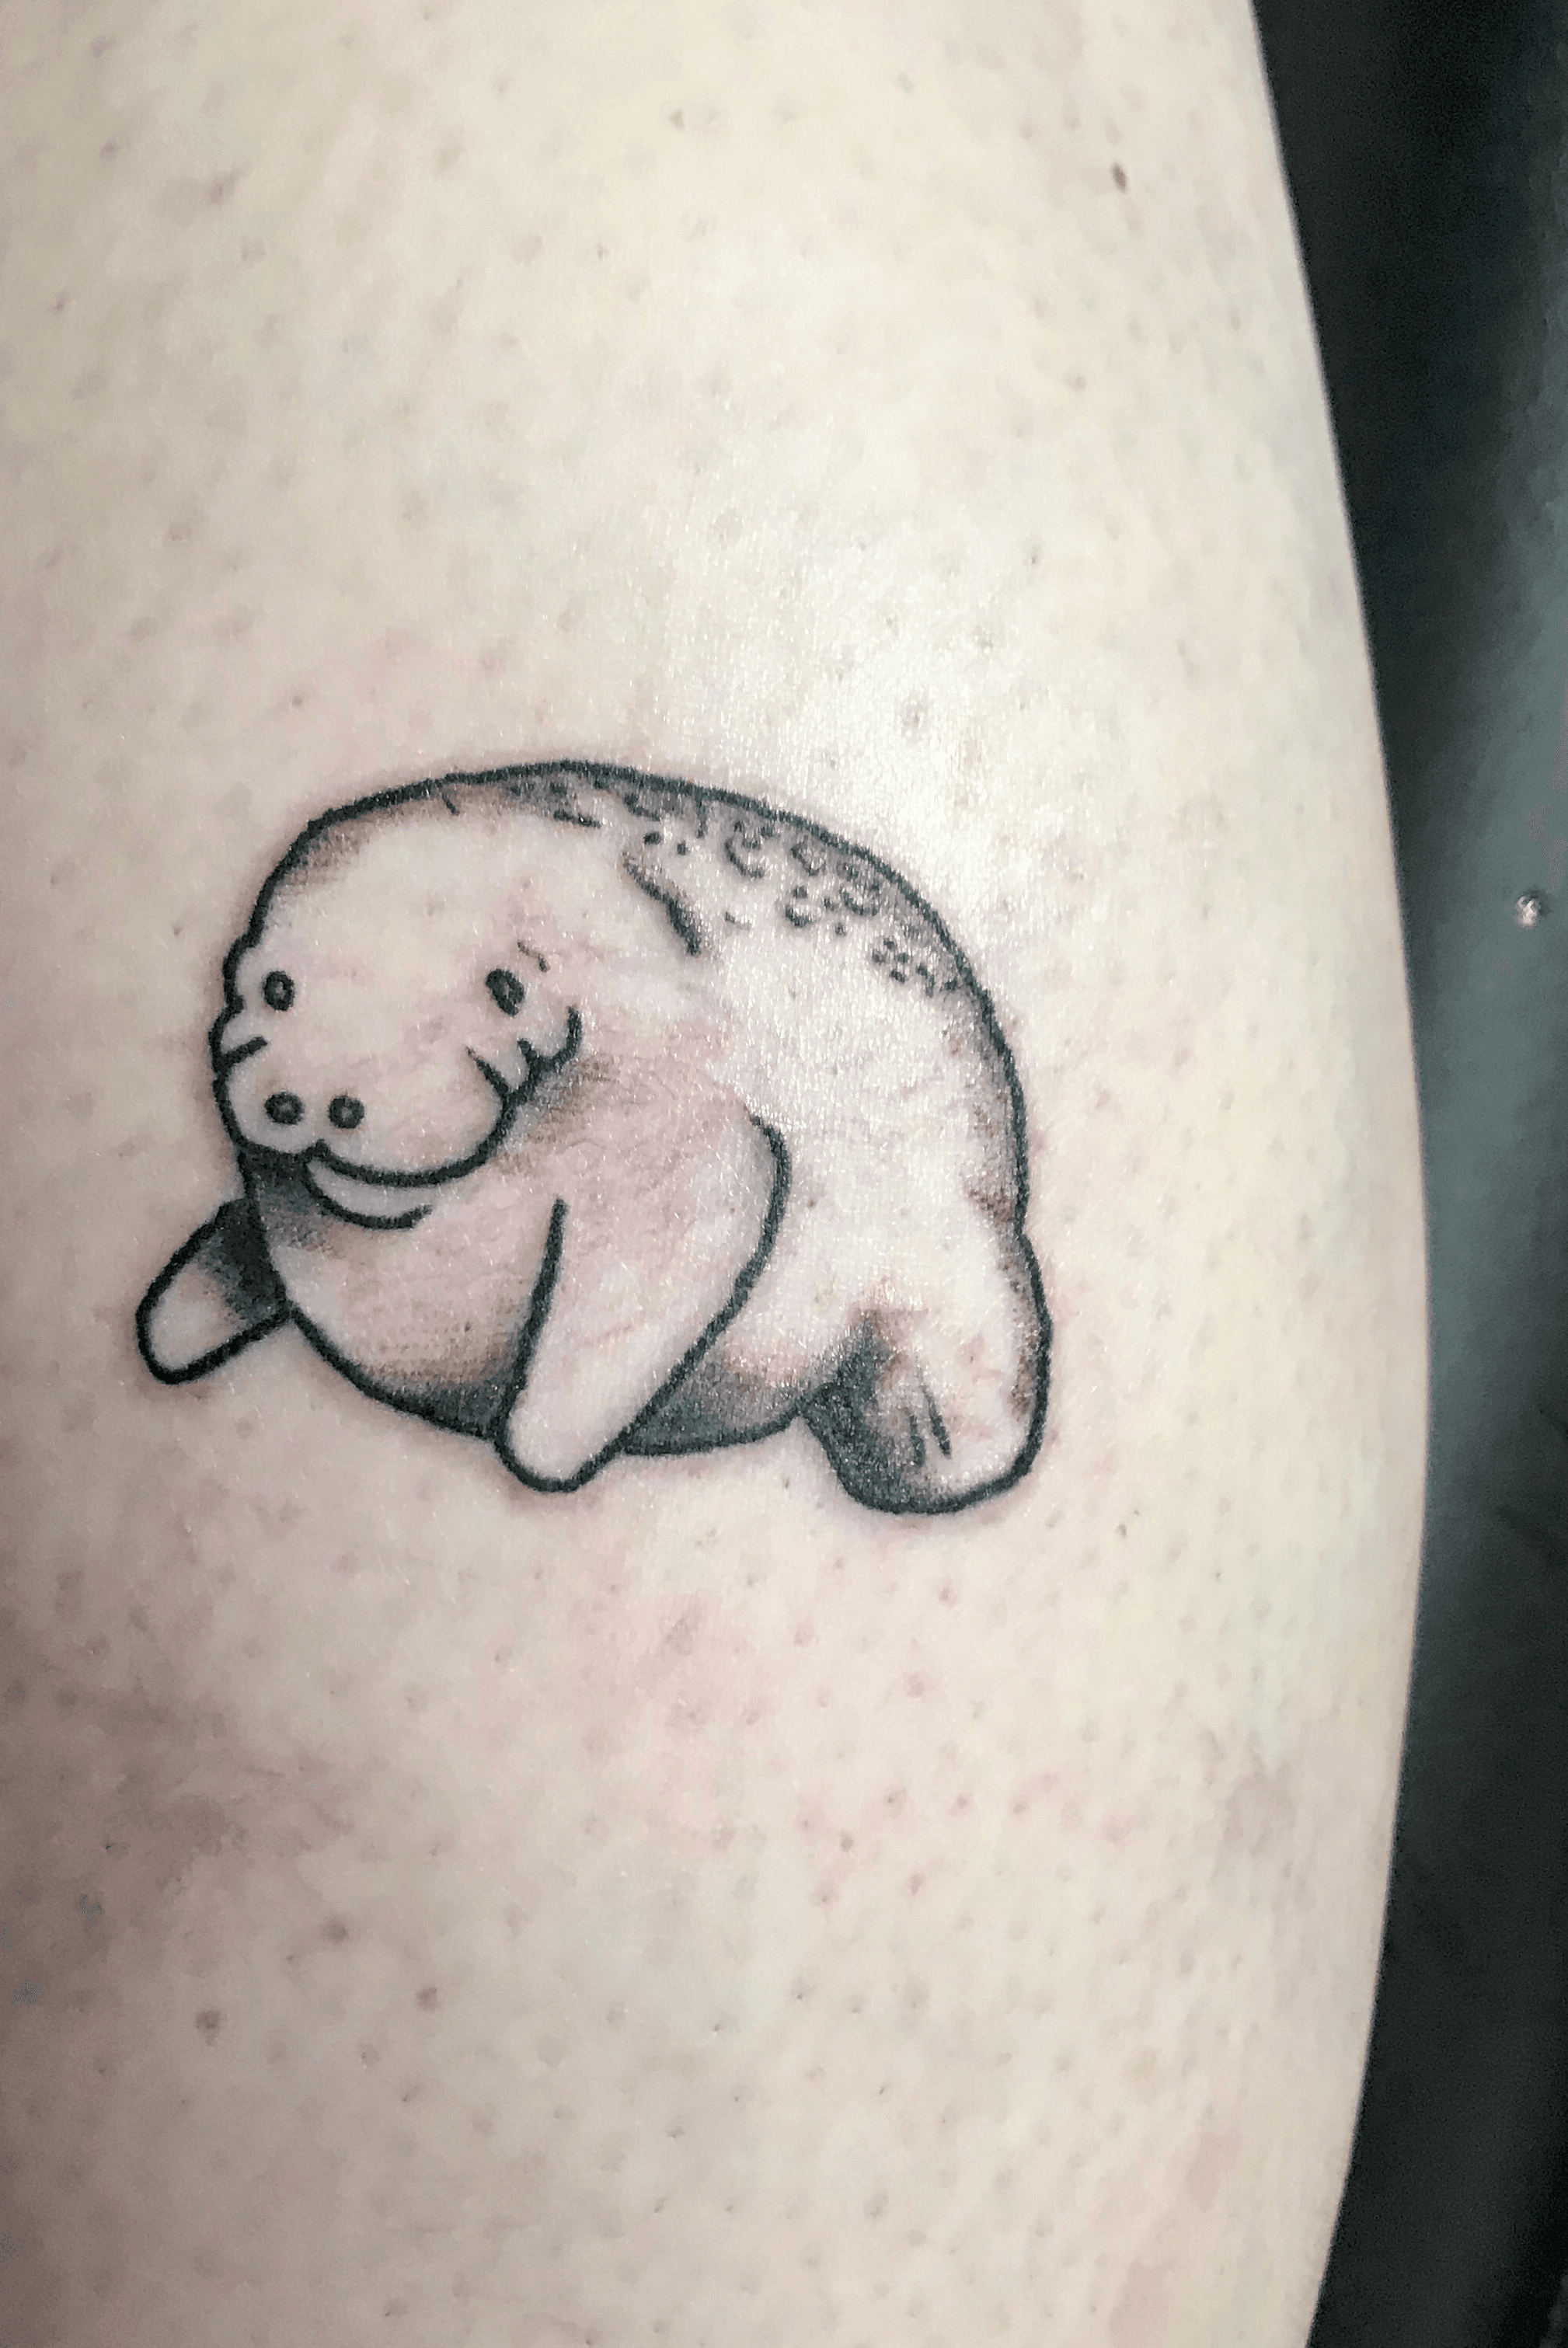 Mermanatee done by Shi at FineLine Tattoos in California  rtattoos